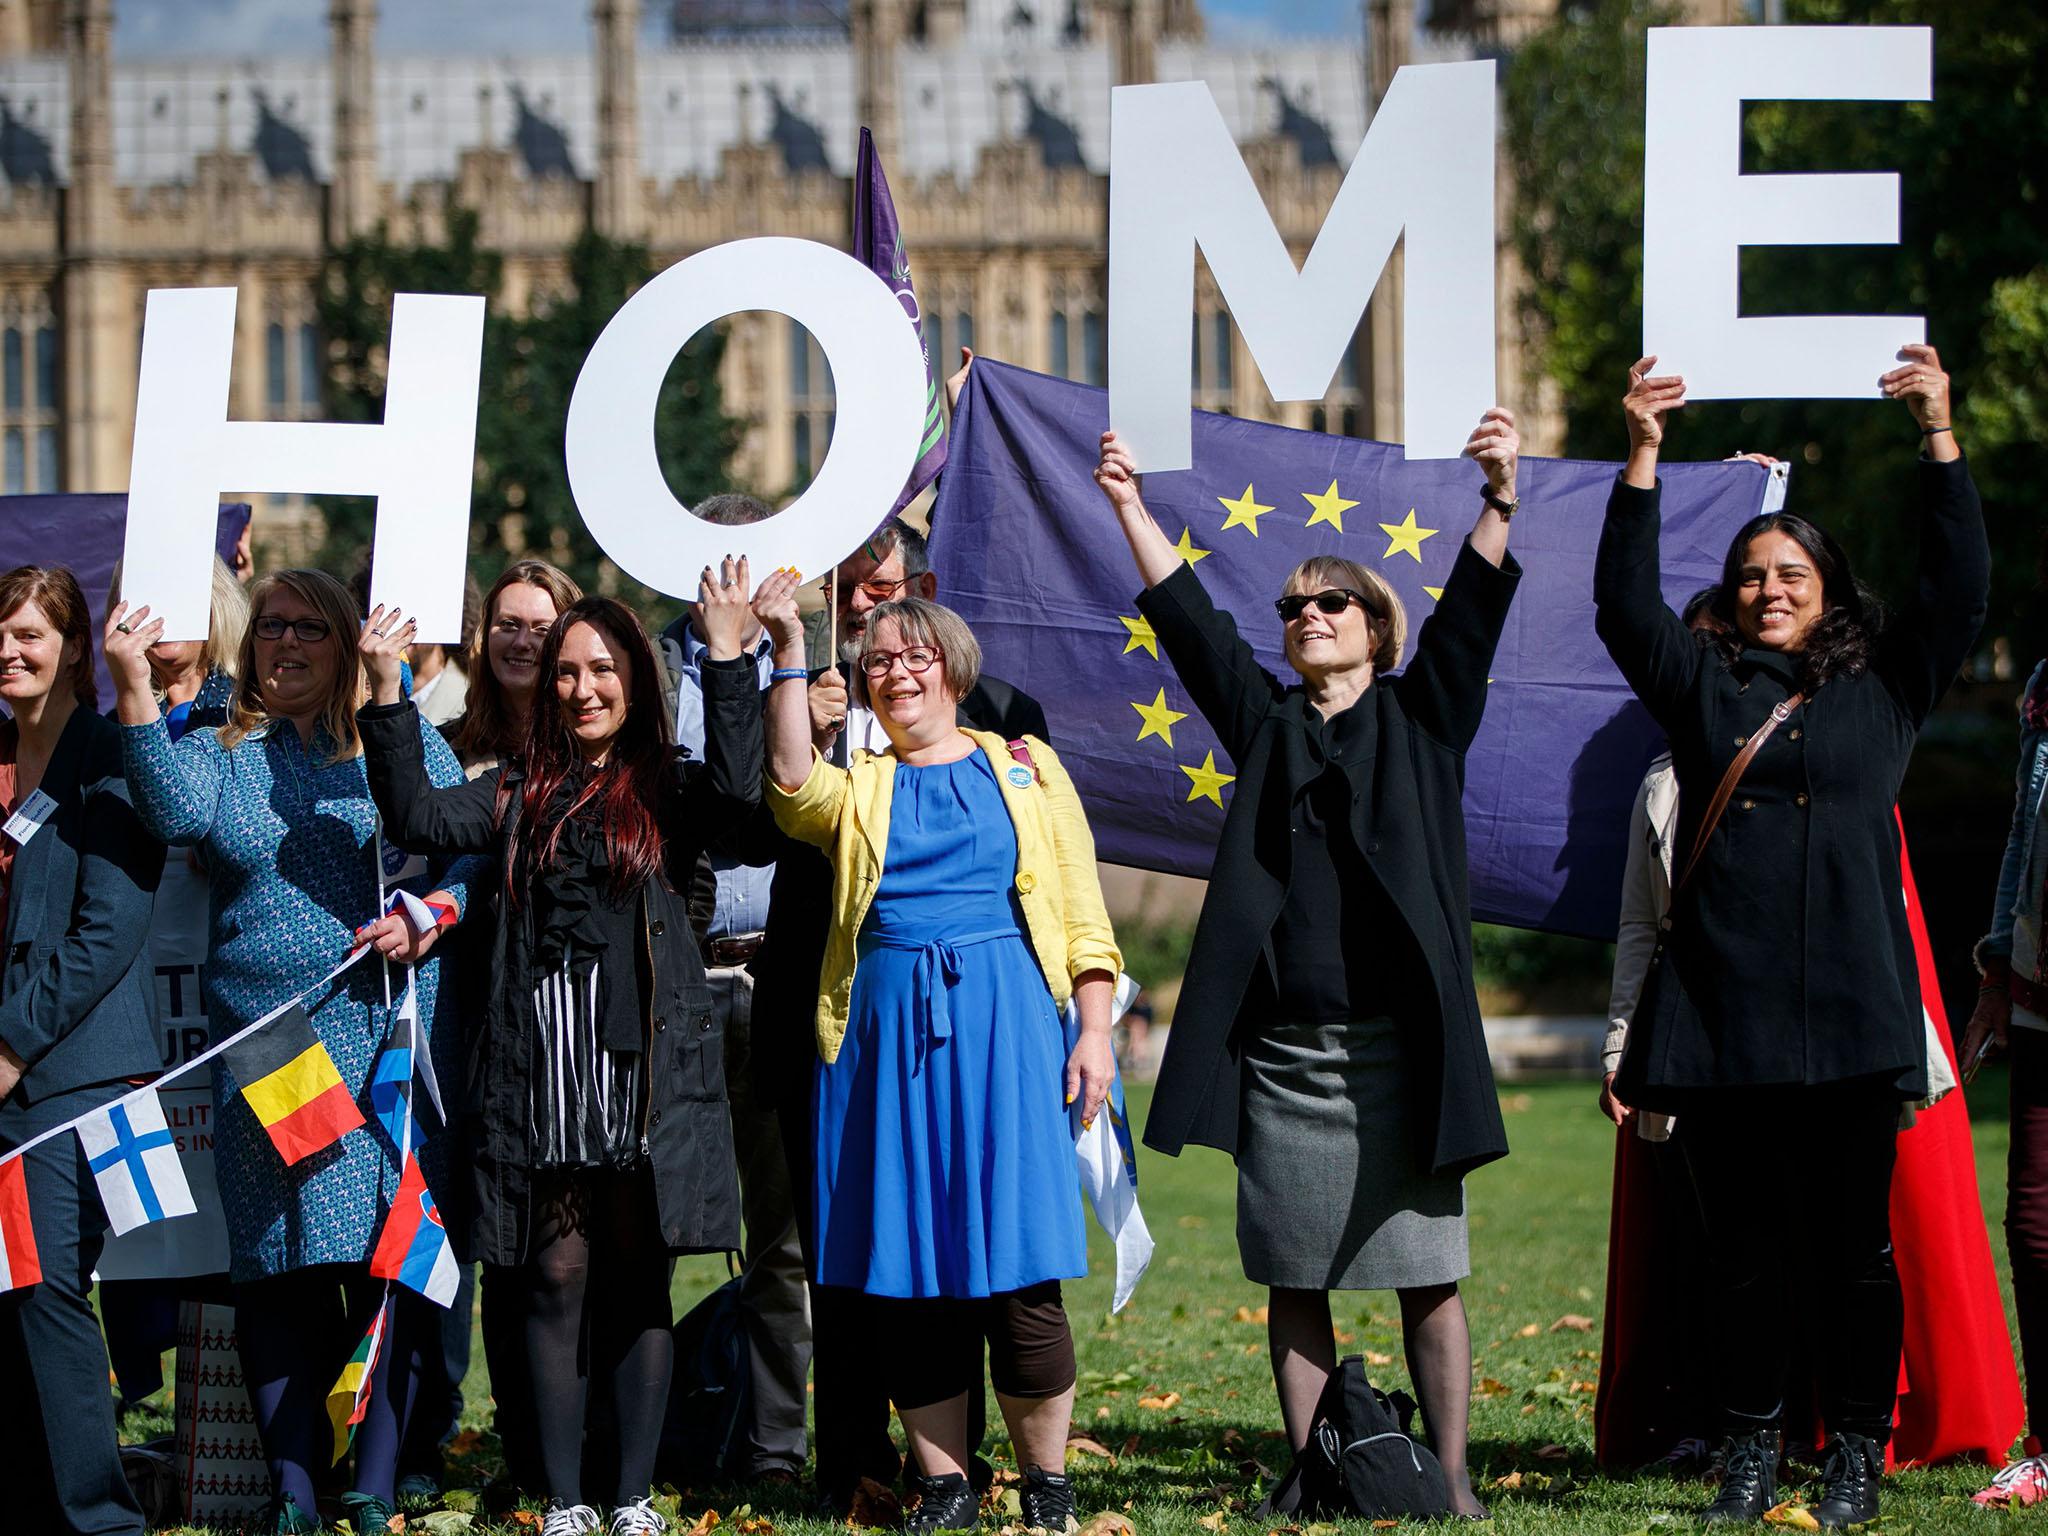 Demonstrators lobby MPs to guarantee the rights of EU citizens in the UK after Brexit during a protest outside the Houses of Parliament in September 2017